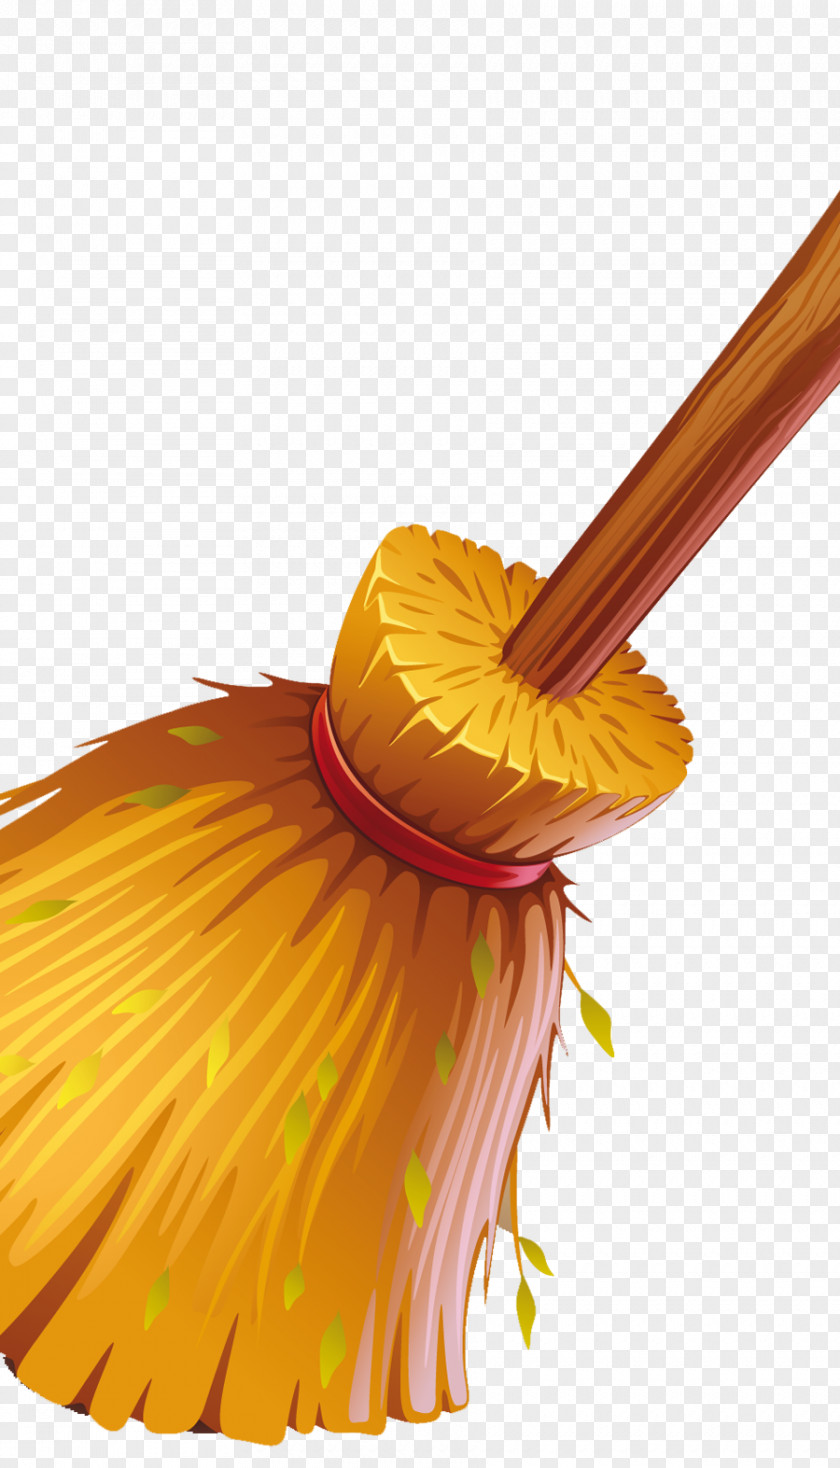 Witch's Broom Clip Art PNG